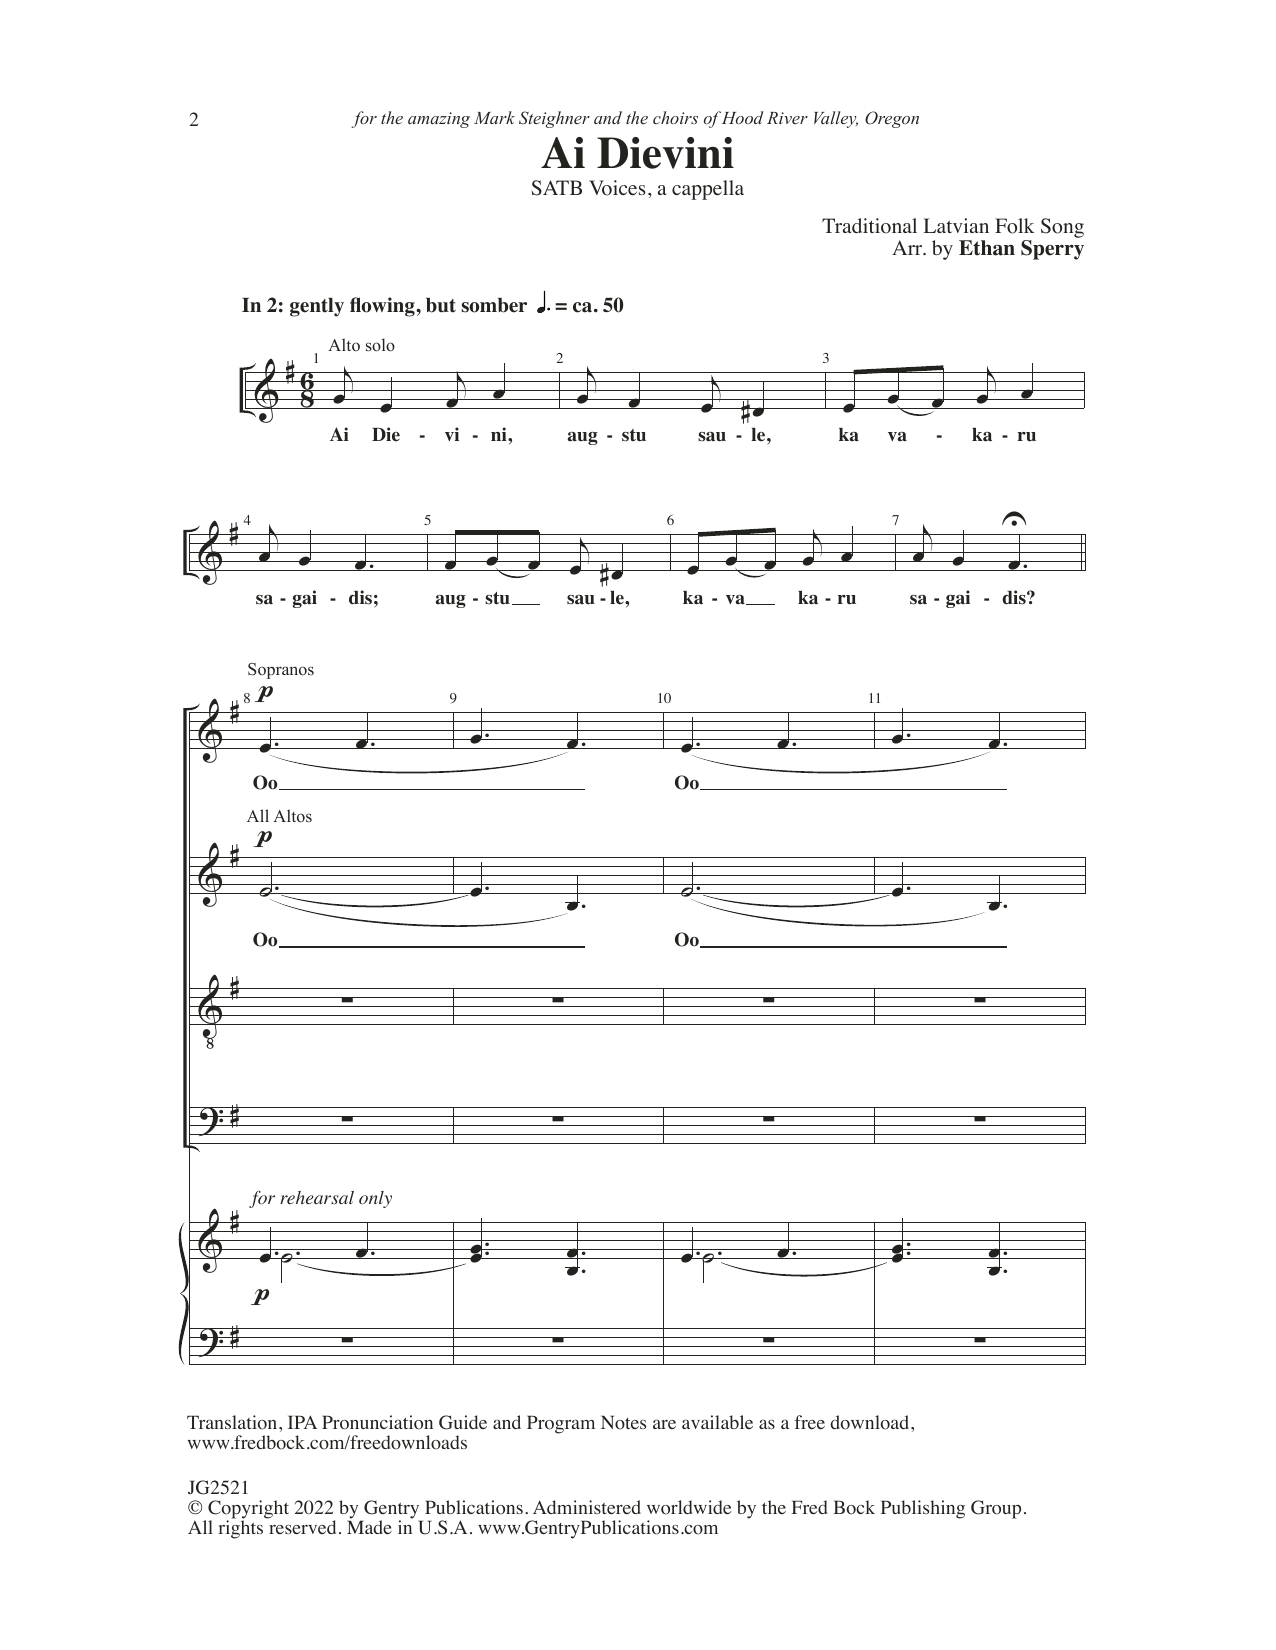 Download Ethan Sperry Ai Dievini Sheet Music